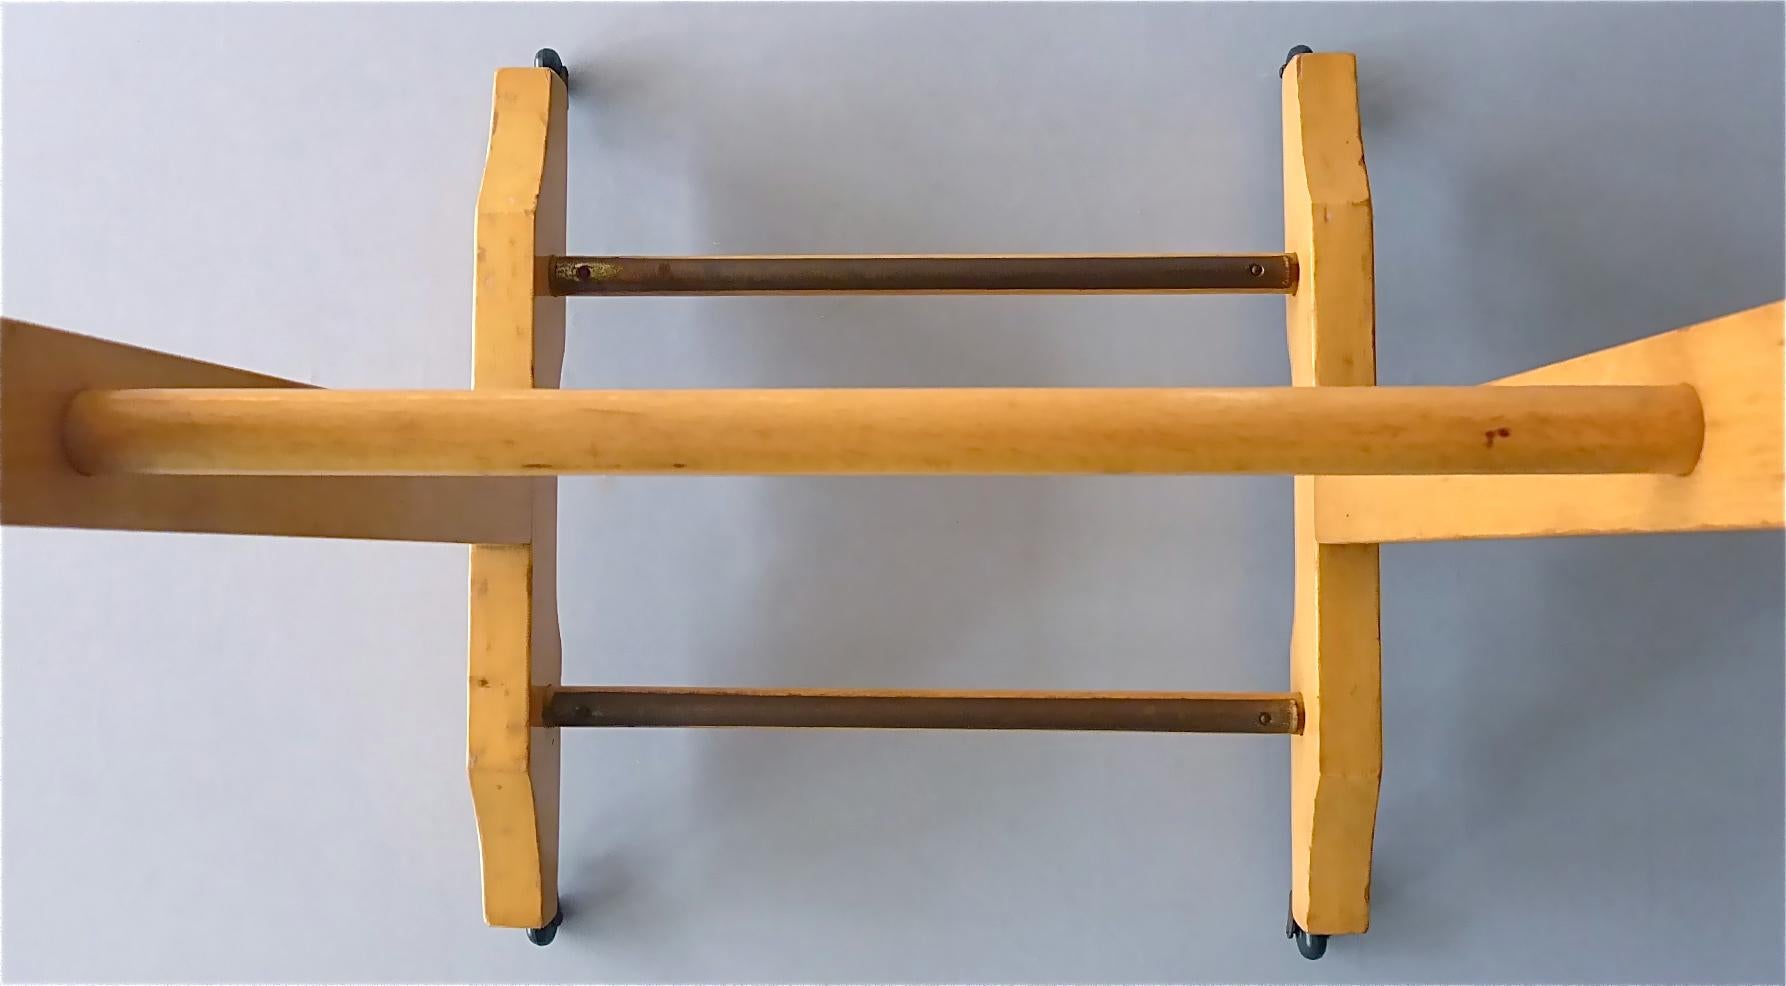 Signed Fratelli Reguitti Ico Parisi Italian Midcentury Valet Stand Wood Brass For Sale 2